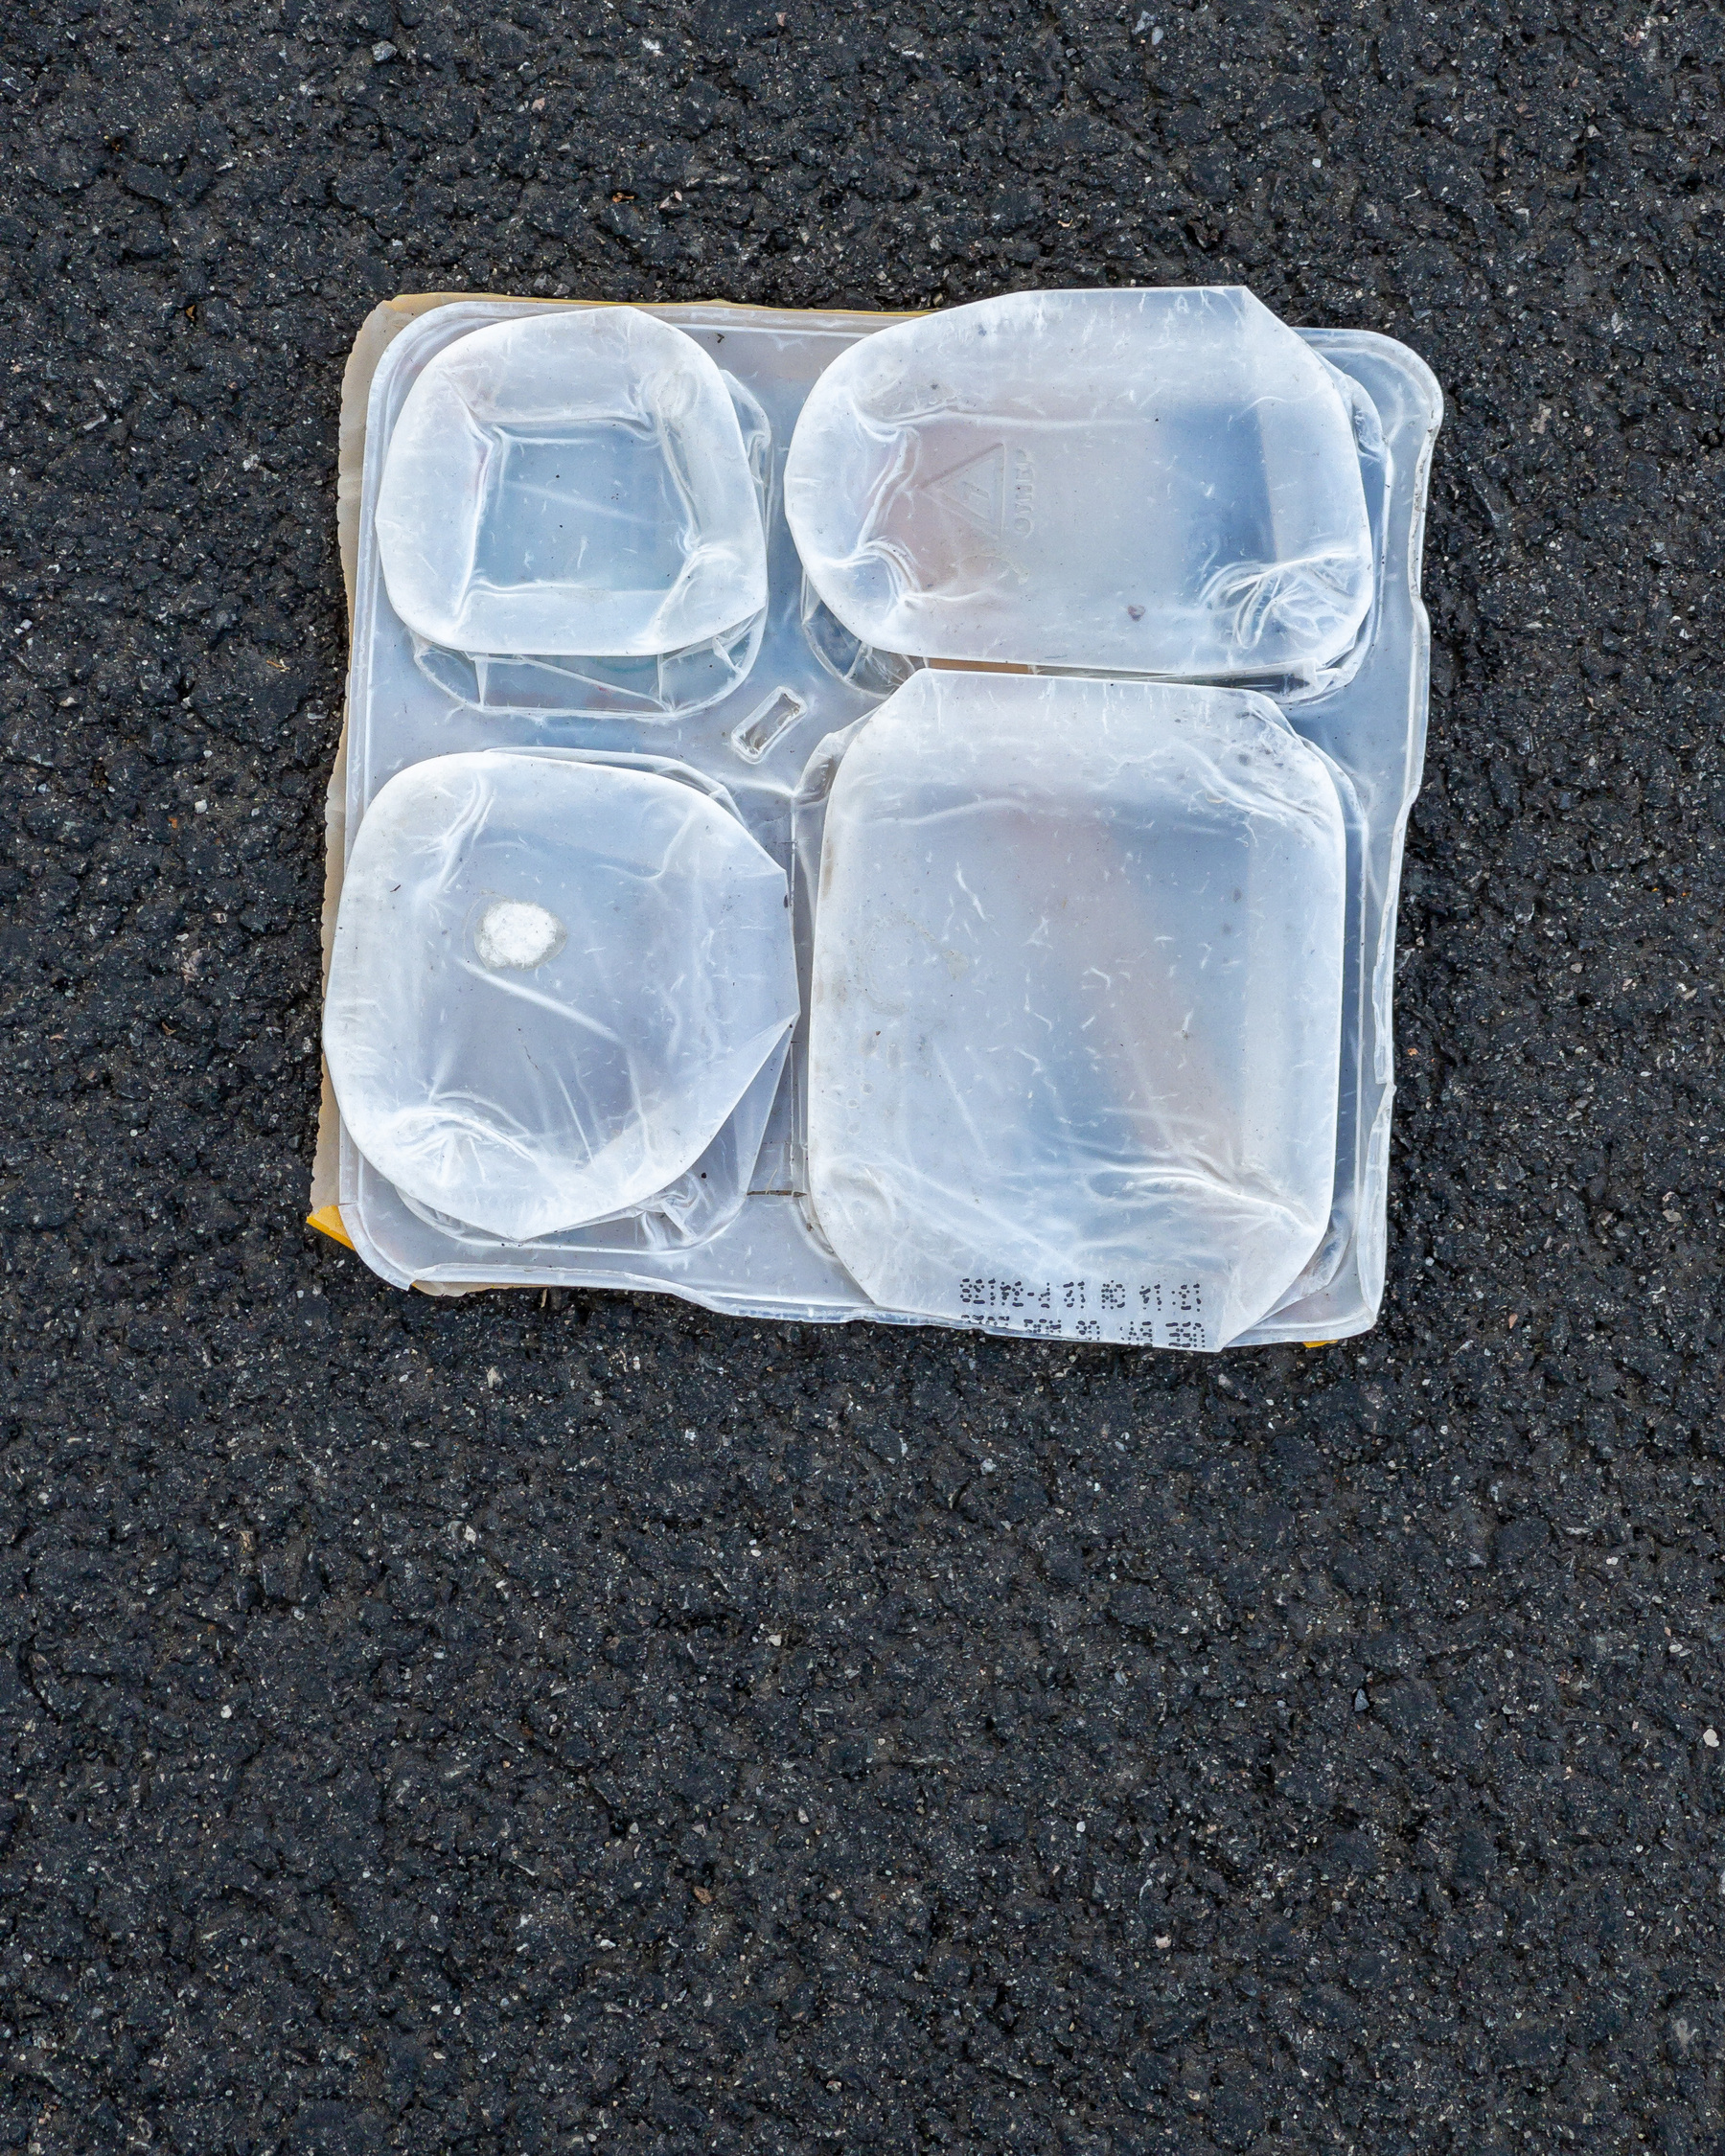 Square translucent plastic packaging tray with four compartments, flattened on asphalt pavement.